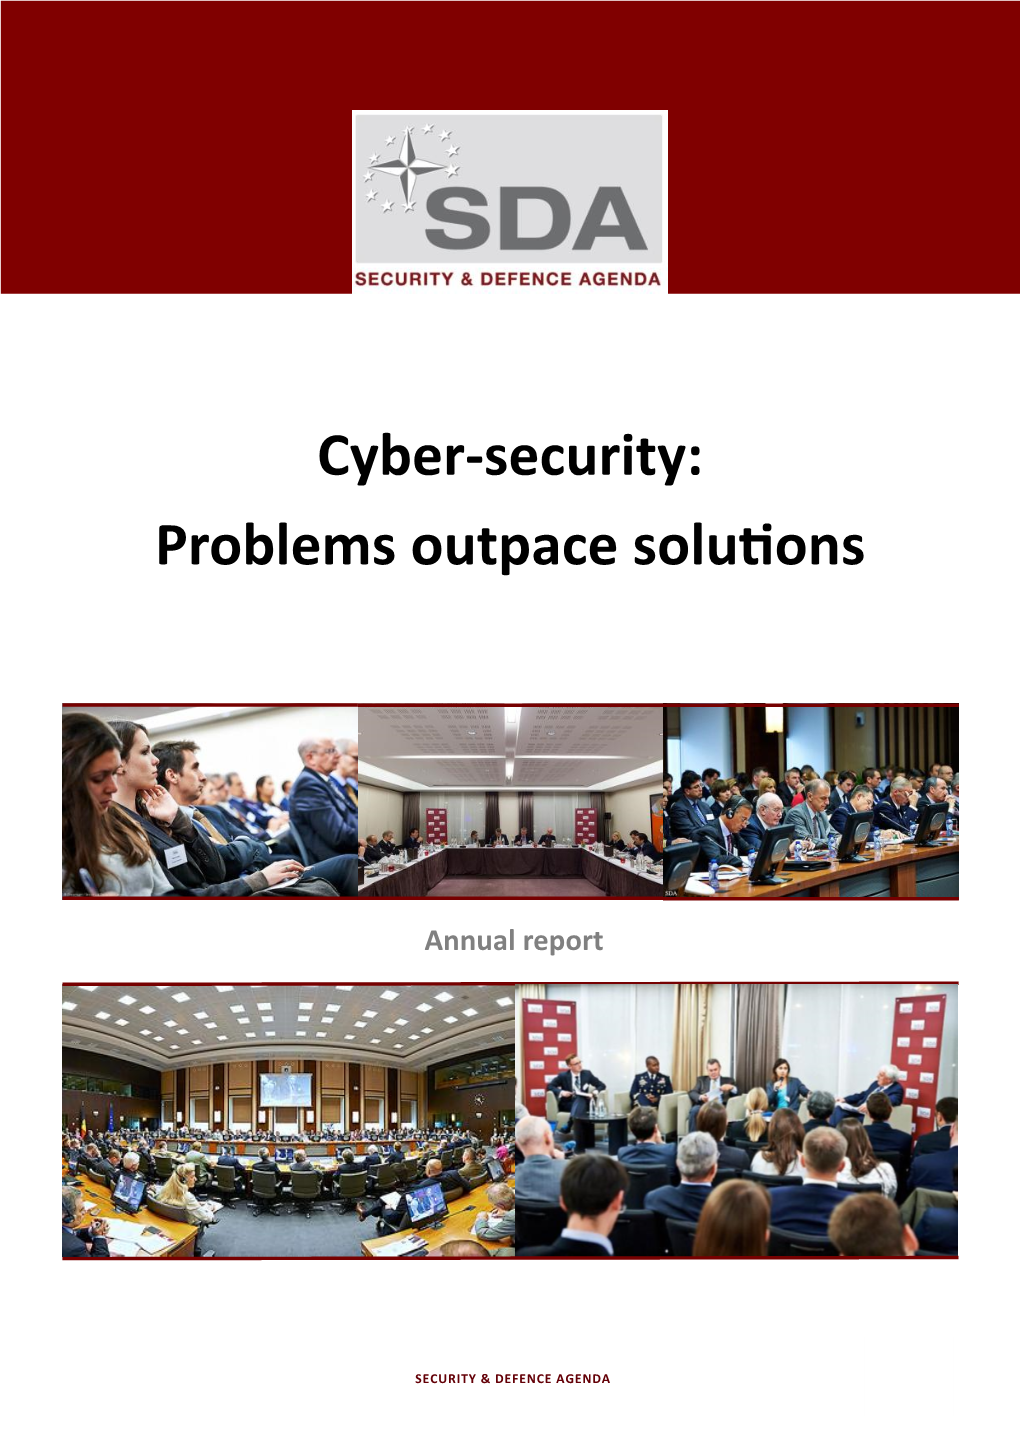 Cyber-Security: Problems Outpace Solutions